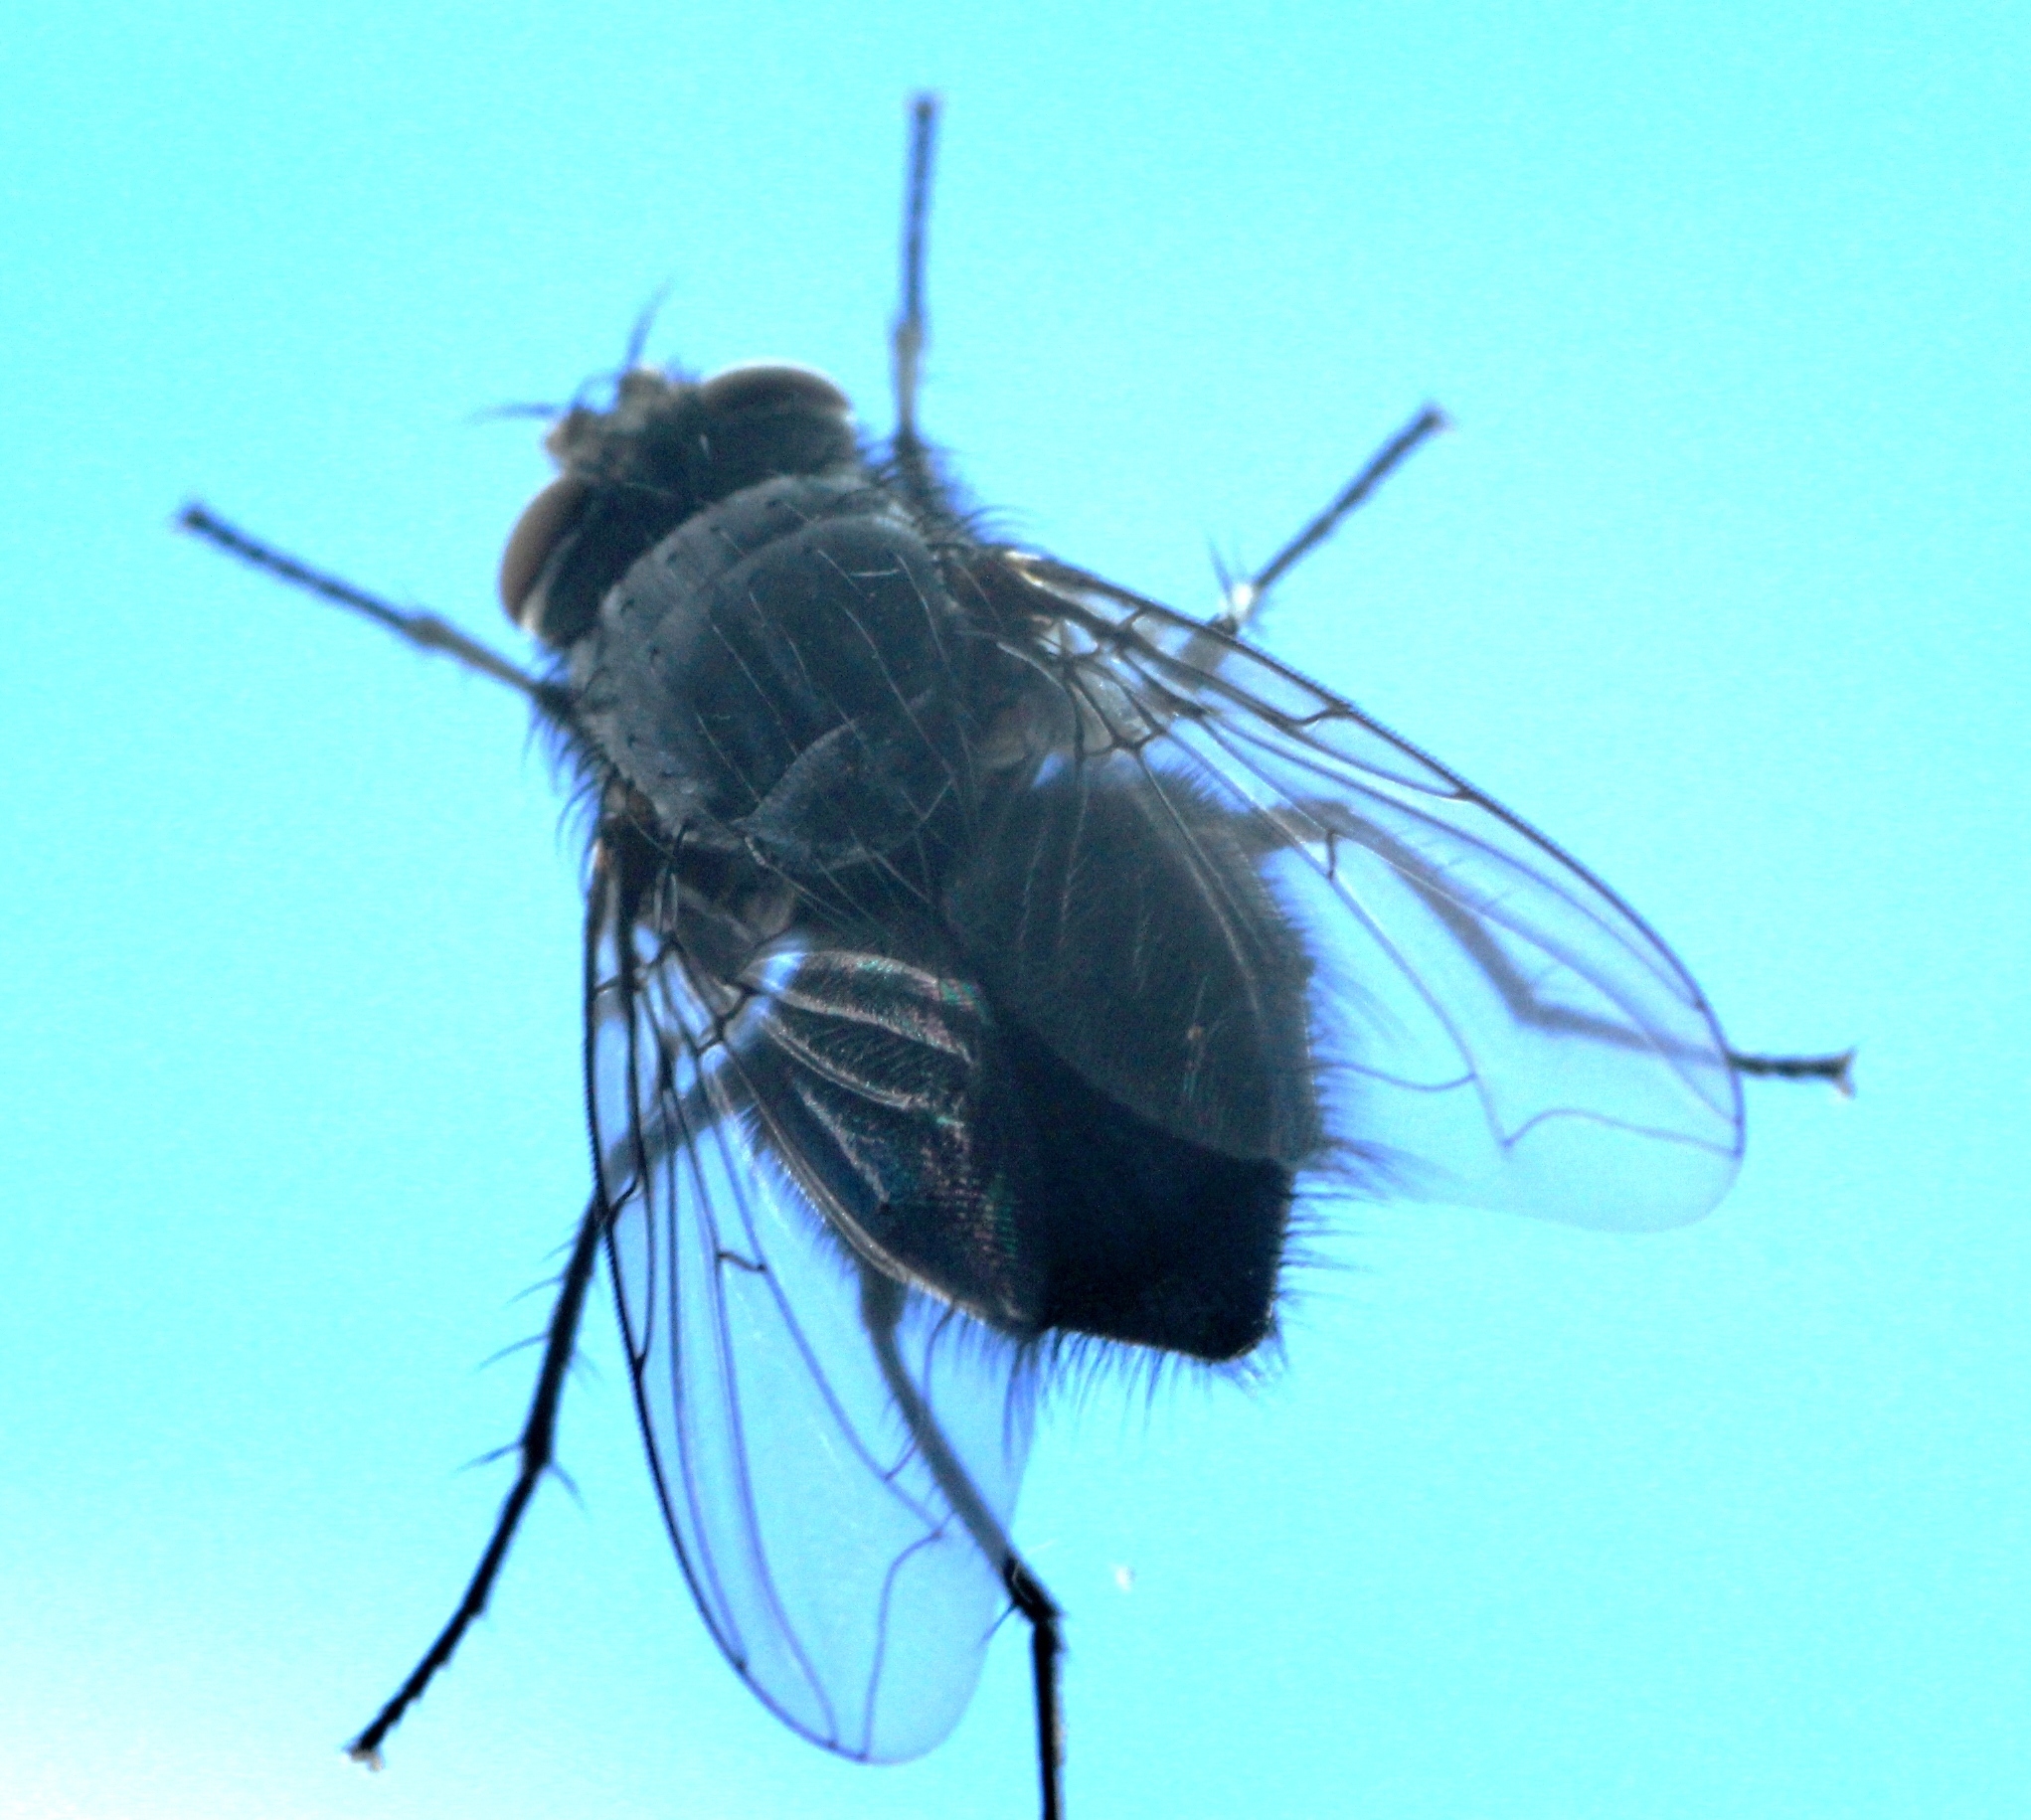 Fly on glass...